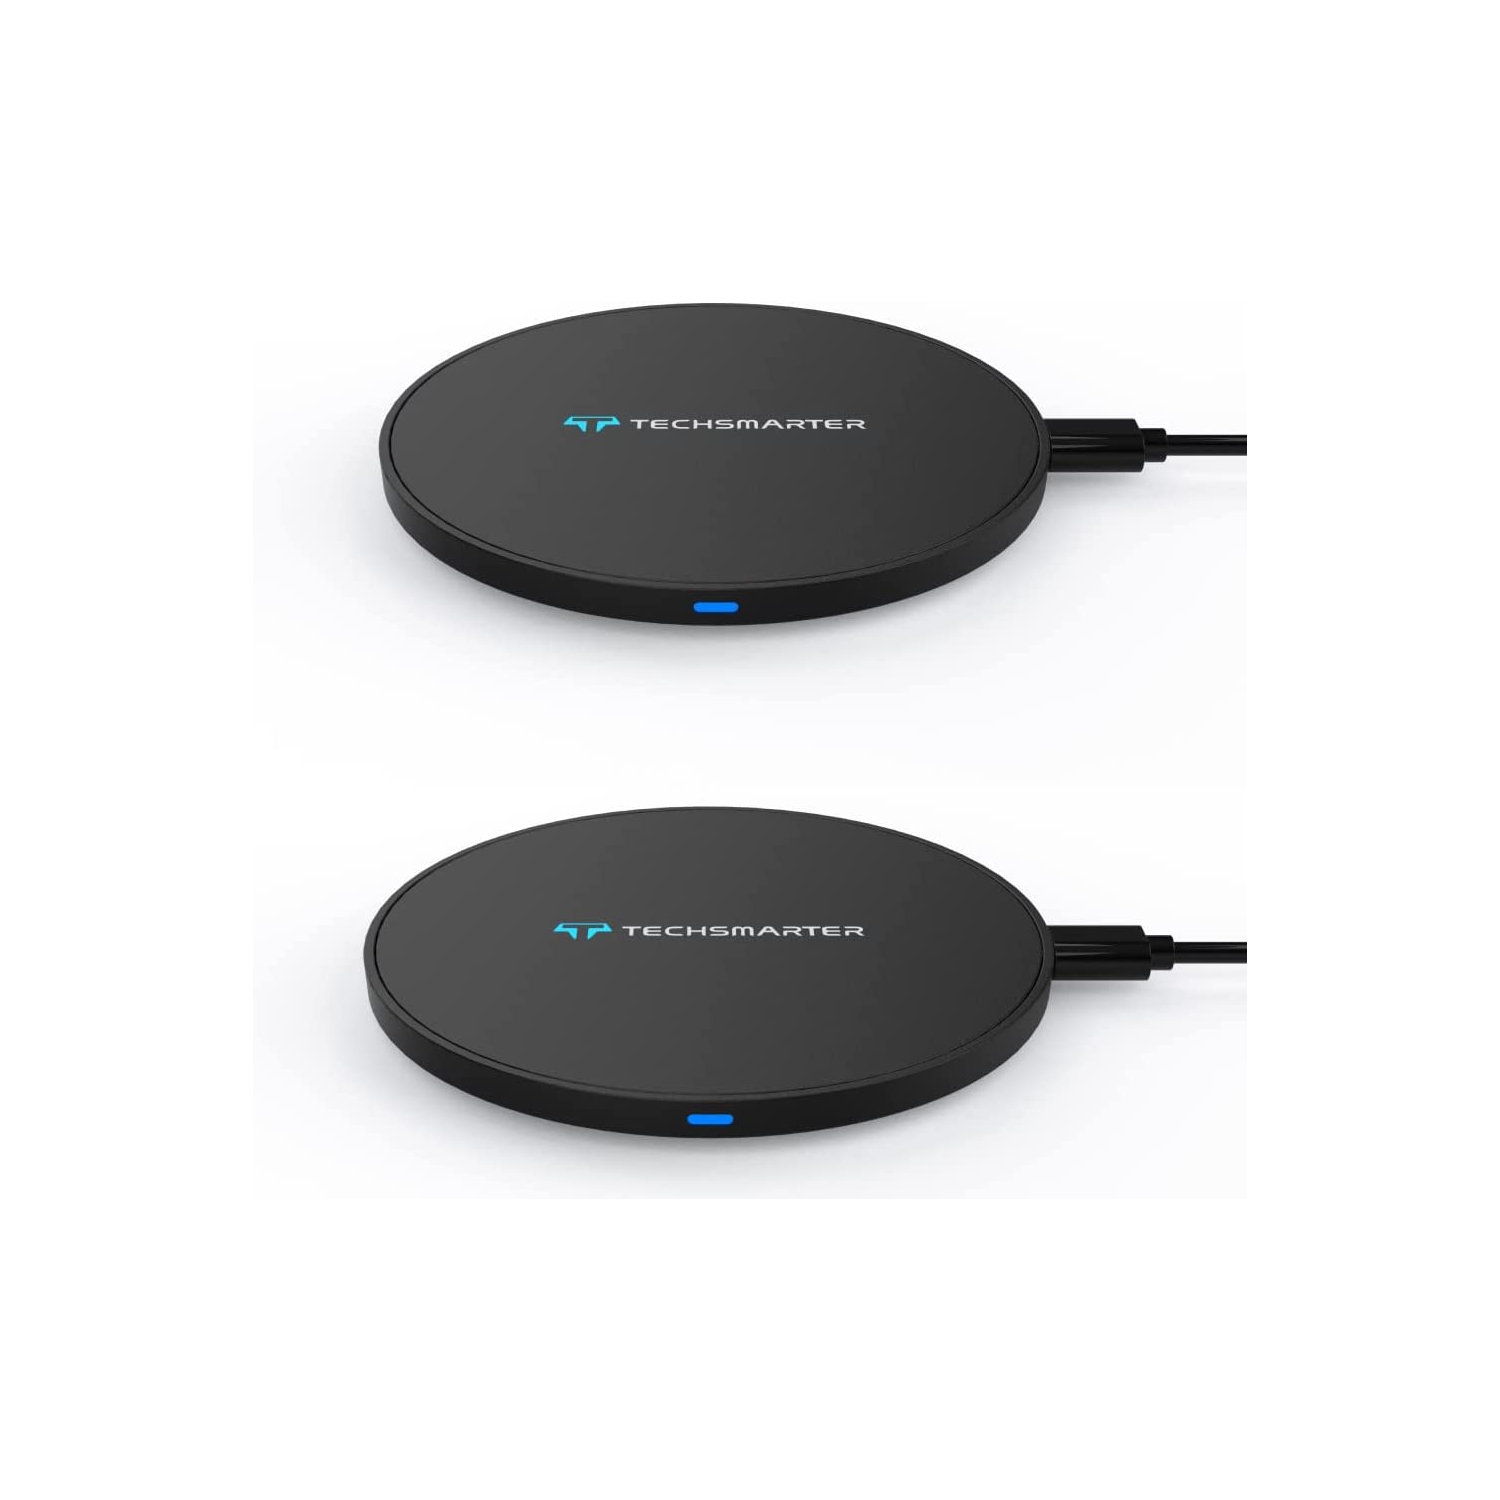 2-Pack Techsmarter 15W Fast Charging Wireless Charger Pad, Qi Certified. For iPhone 12, 11, X, XR, XS, 8 Samsung Galaxy S21, S20, S10, S9 Note, LG V30, V35, V40, G6, G7, G8